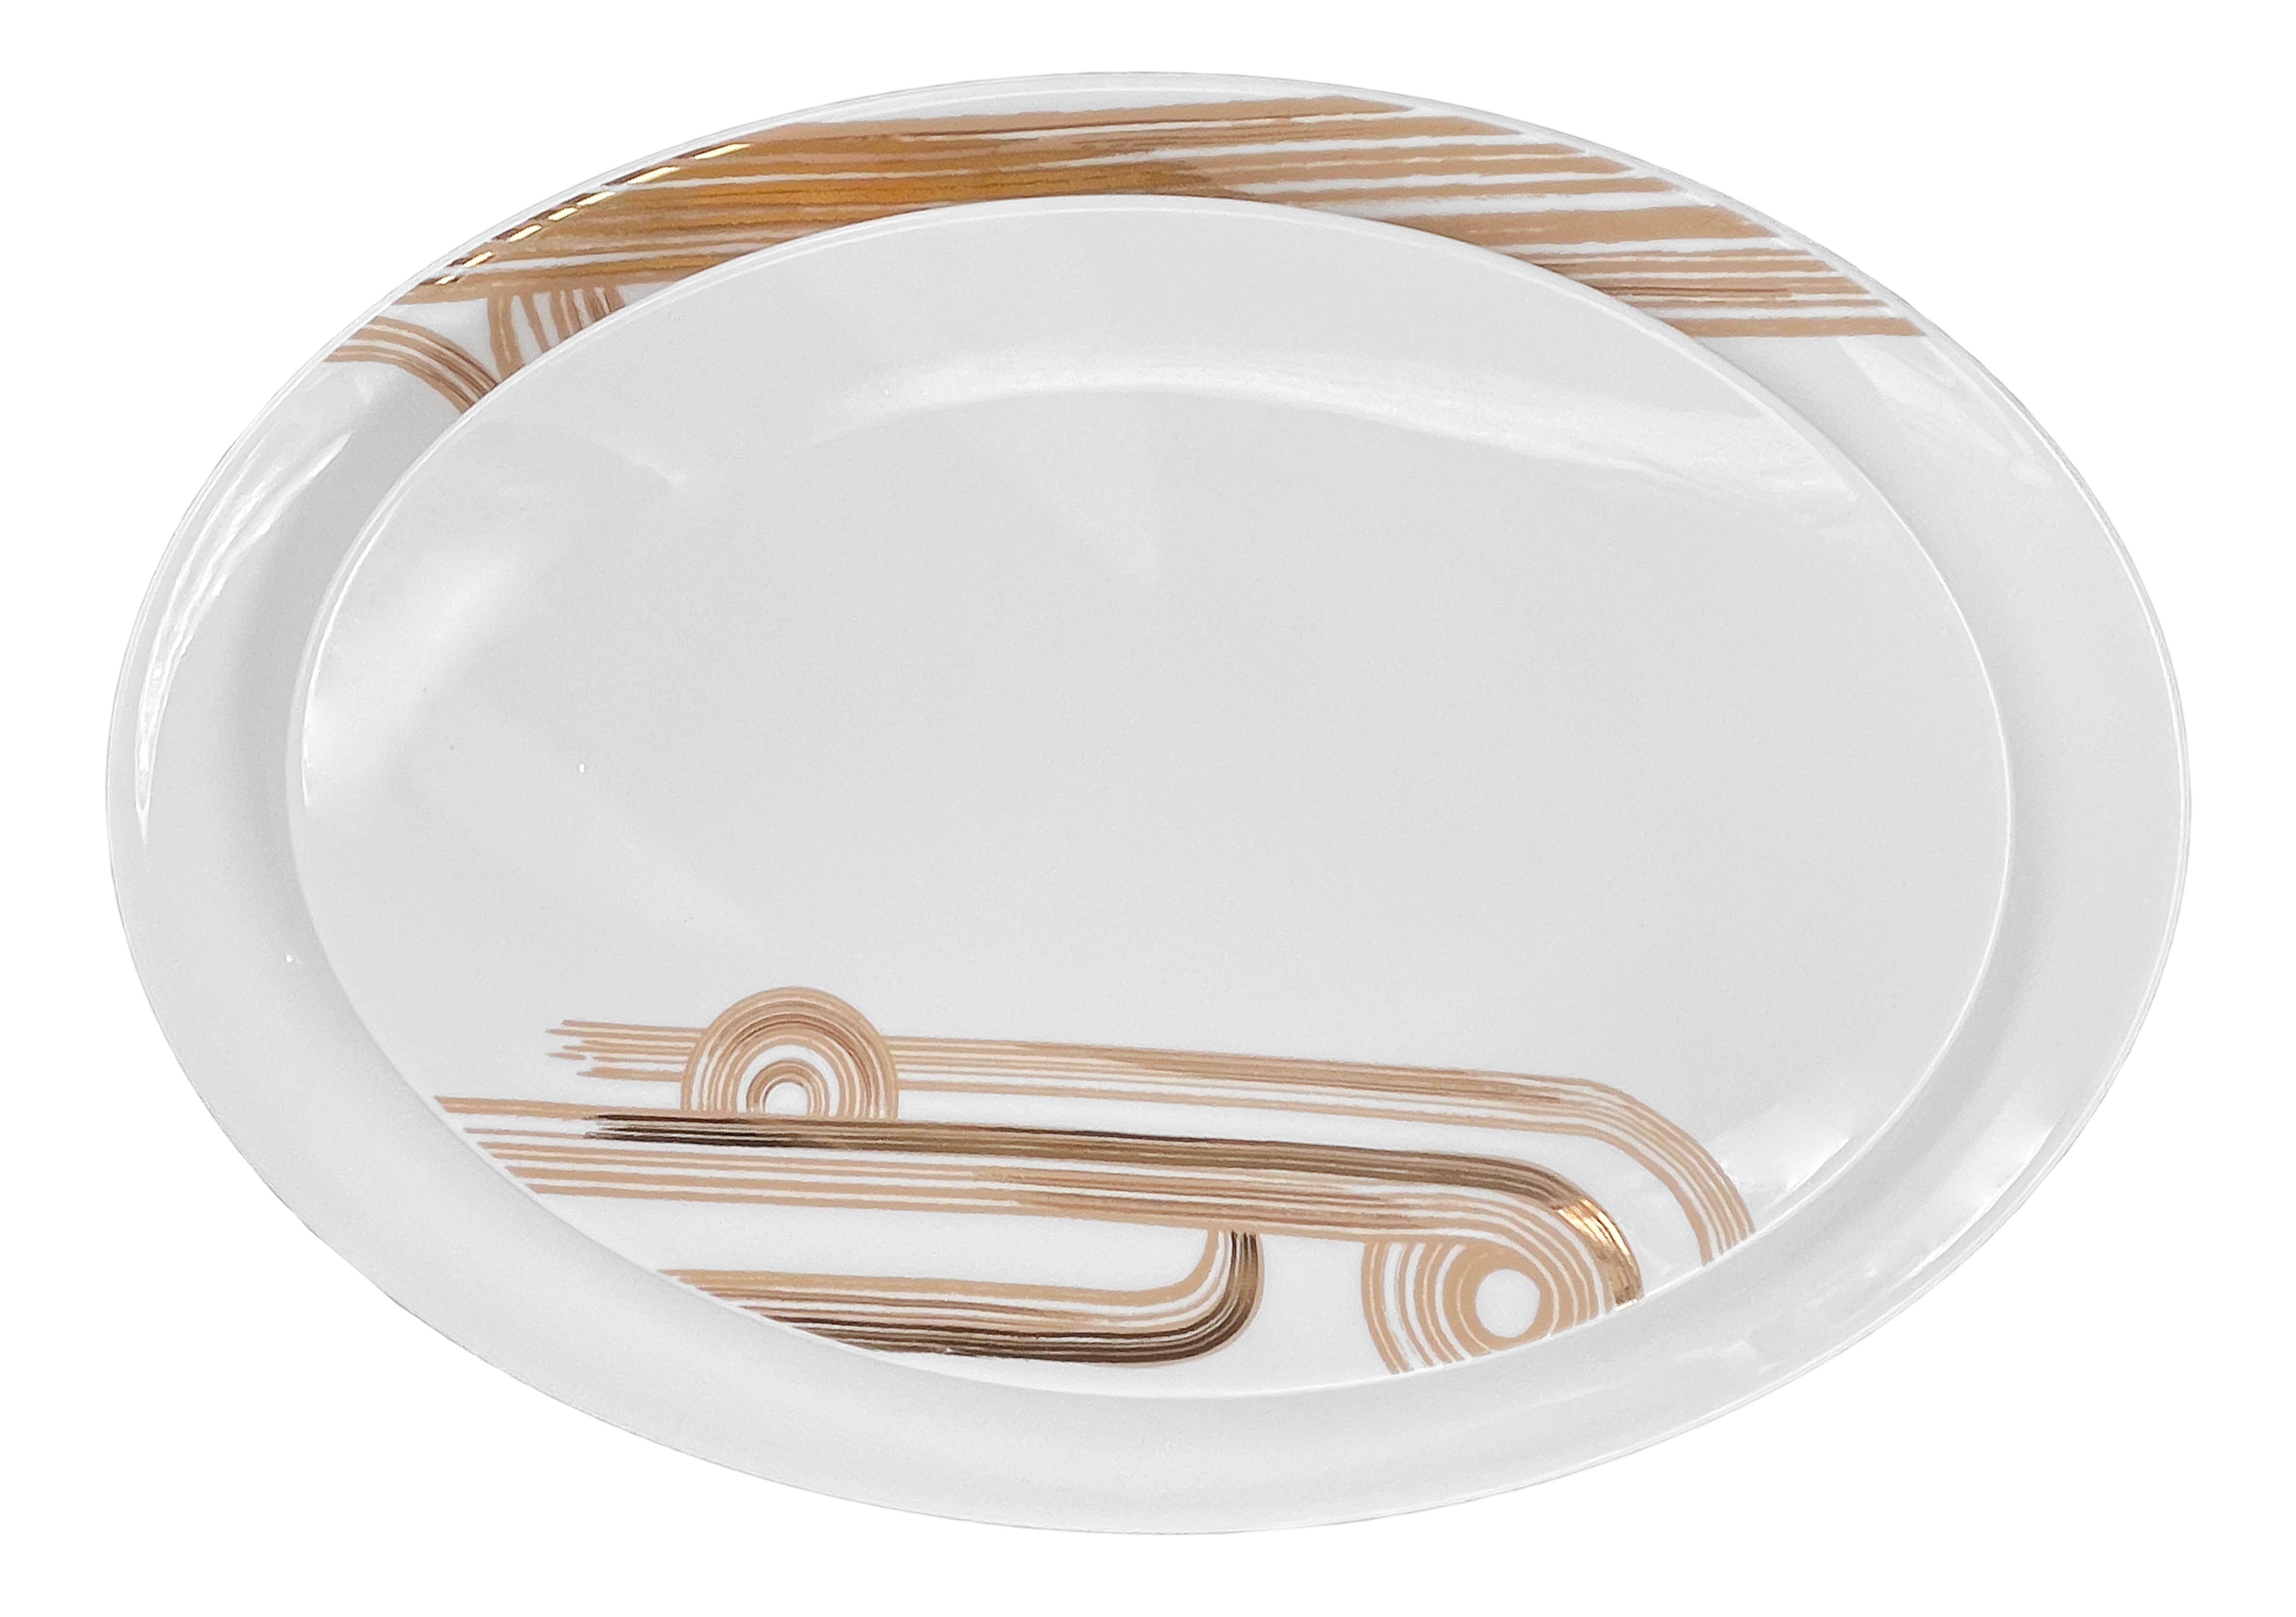 Description: Large oval serving plate
Color: Beige gold
Size: 37 x 26 x 4 H cm
Material: Porcelain and gold
Collection: Art Déco Garden

Larger quantities available upon request, with 8 weeks production time.